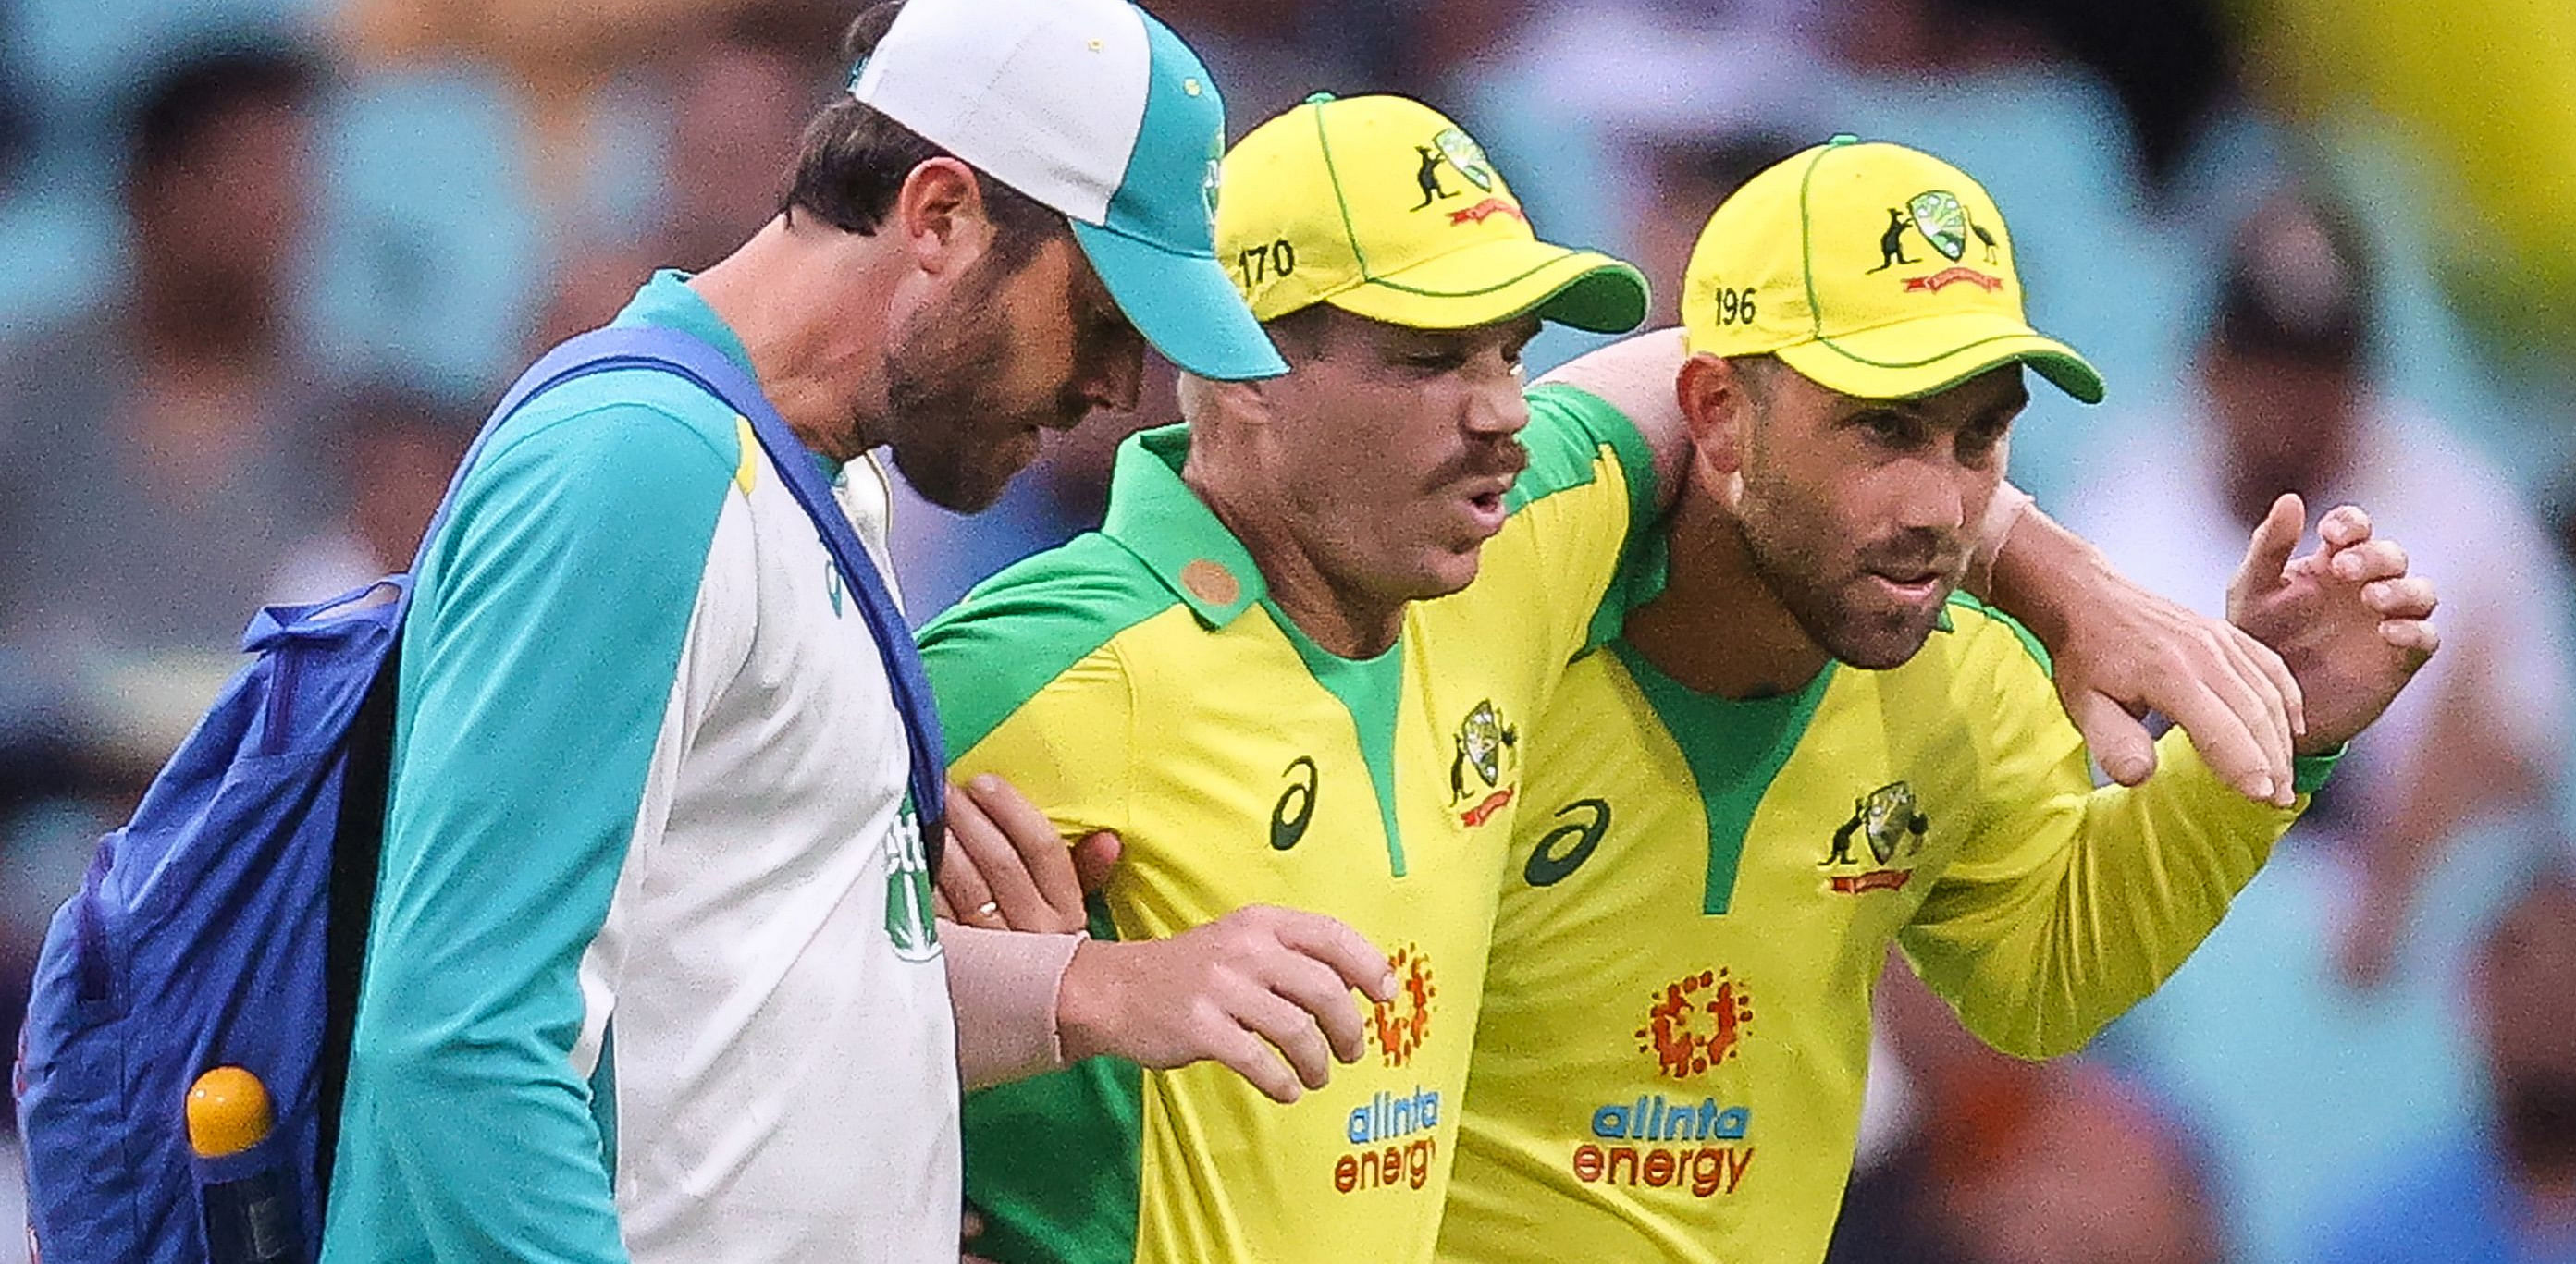 Australia's David Warner (C) is assisted by team mate Glenn Maxwell (R) and a trainer as he leaves the field after he suffered an injury during the one-day cricket match against India at the Sydney Cricket Ground (SCG). Credit: AFP